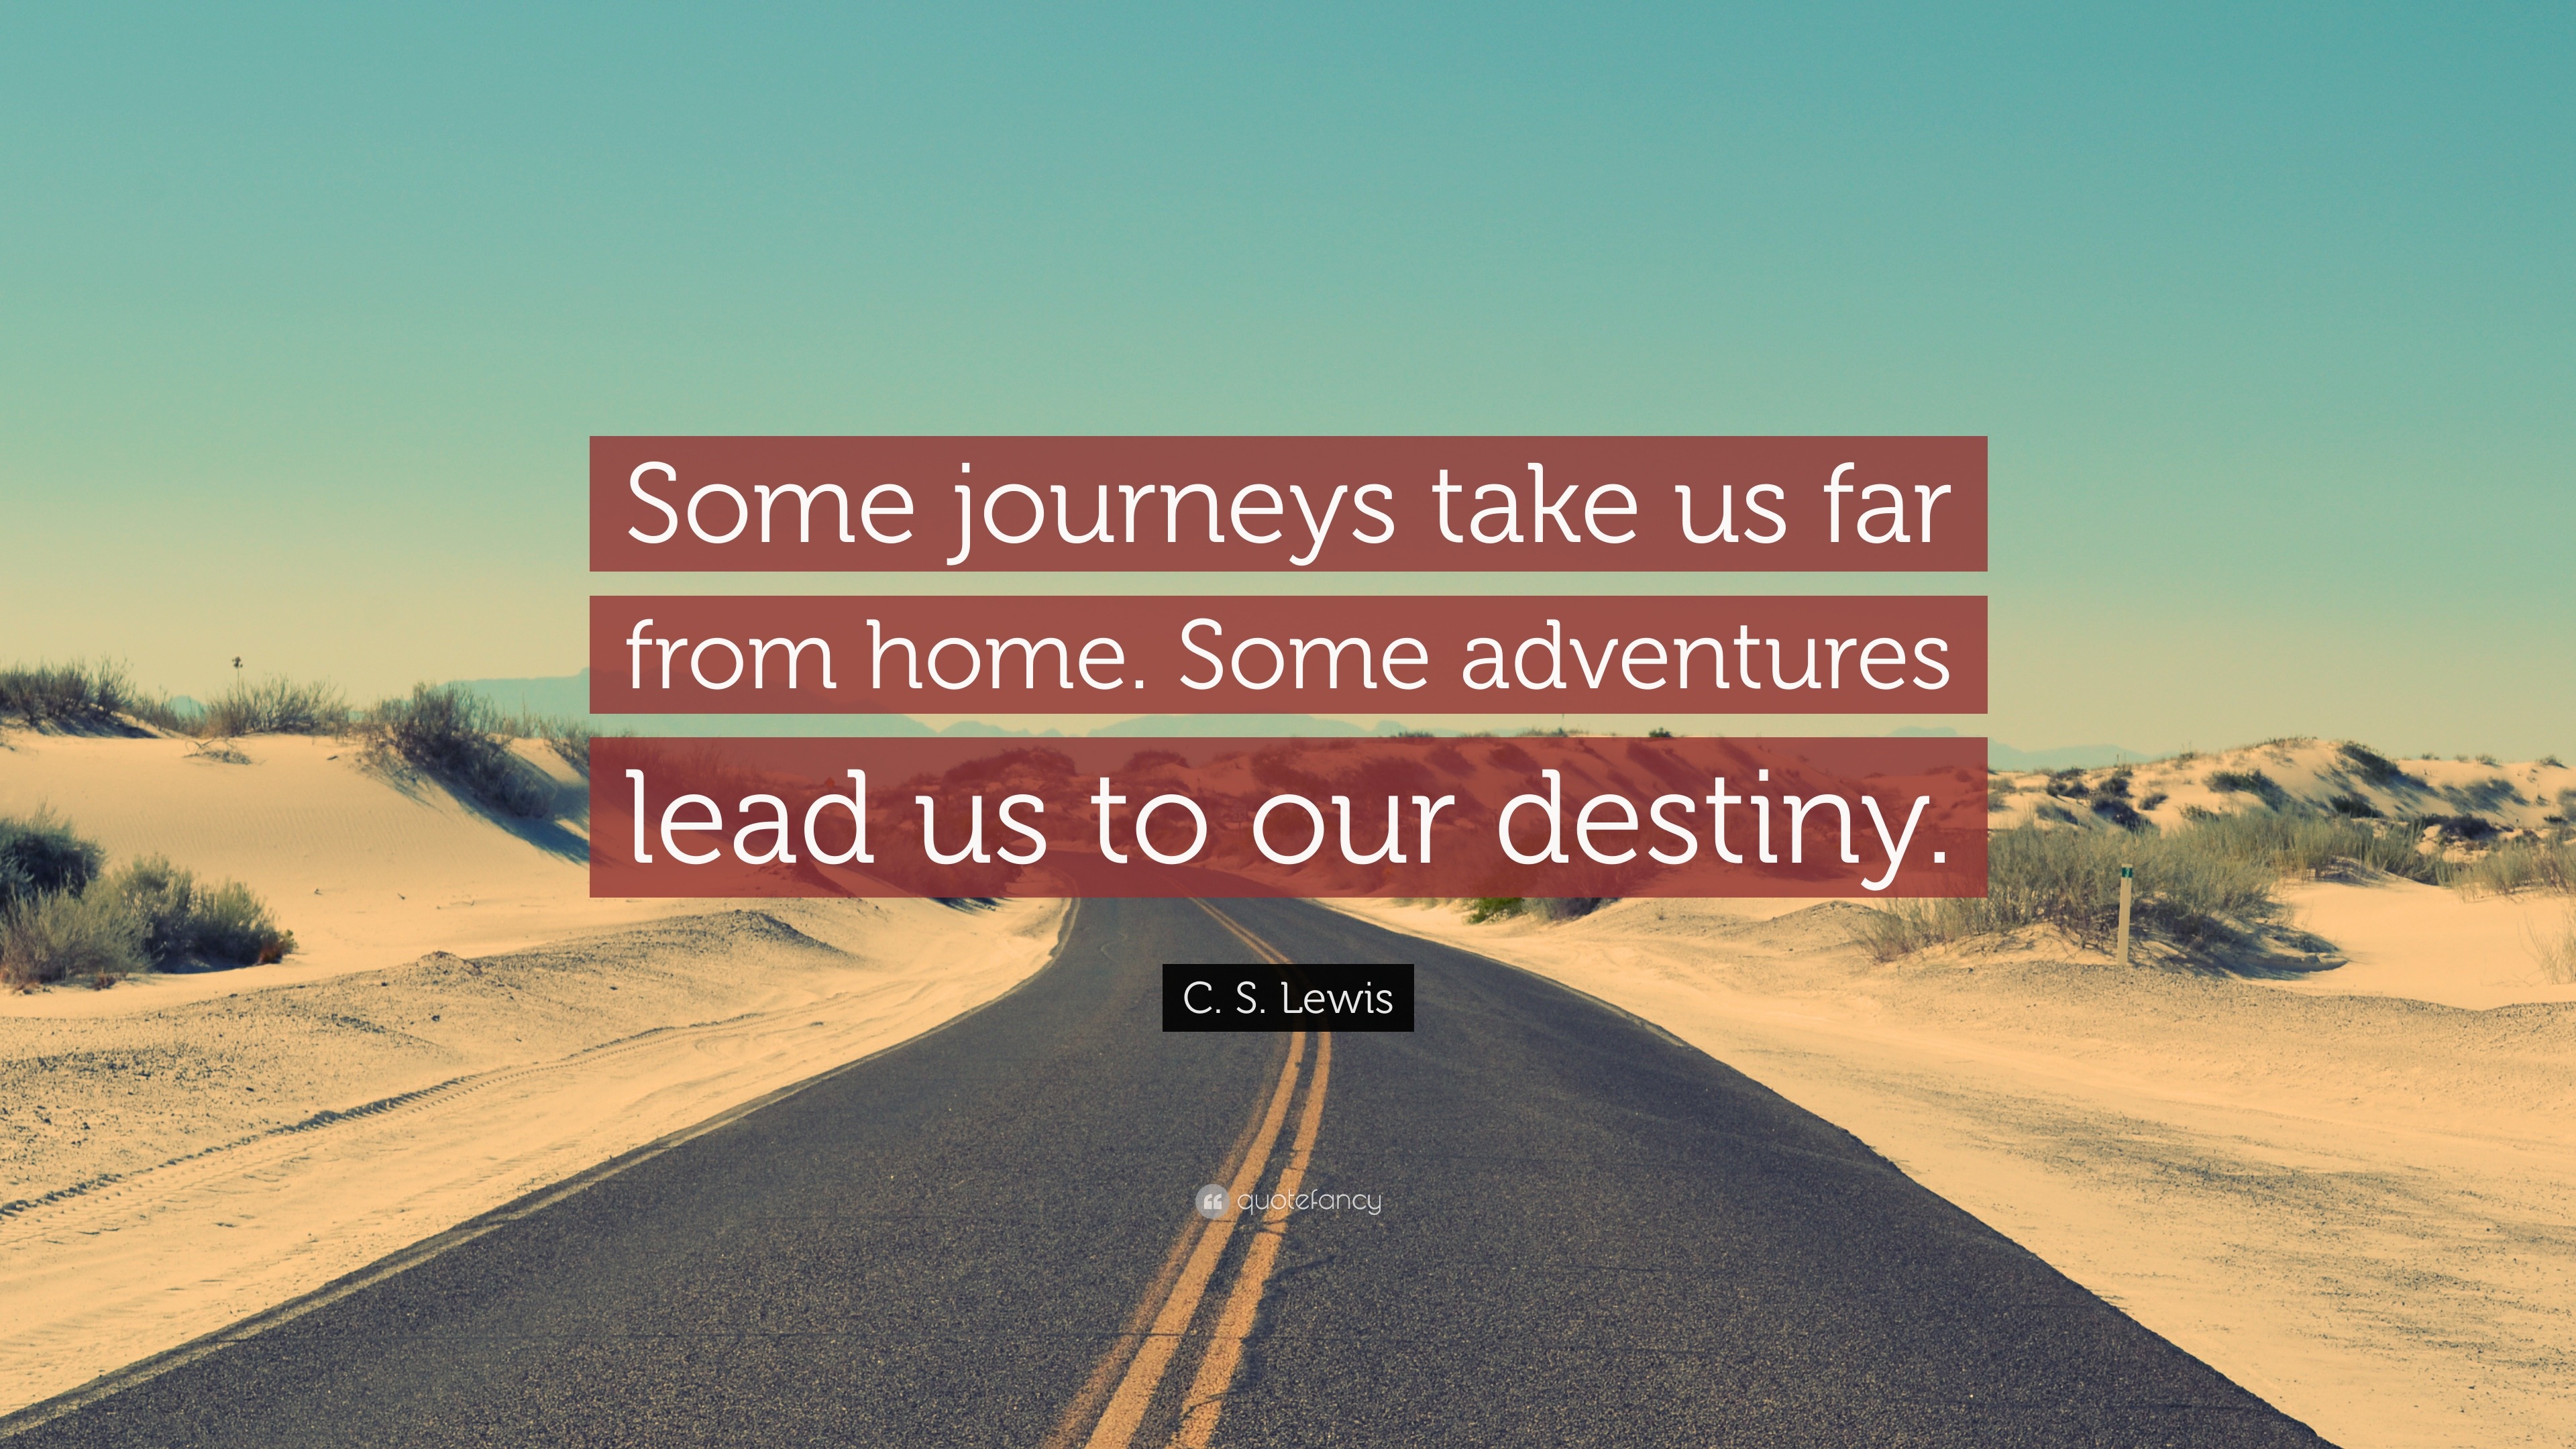 C. S. Lewis Quote “Some journeys take us far from home. Some